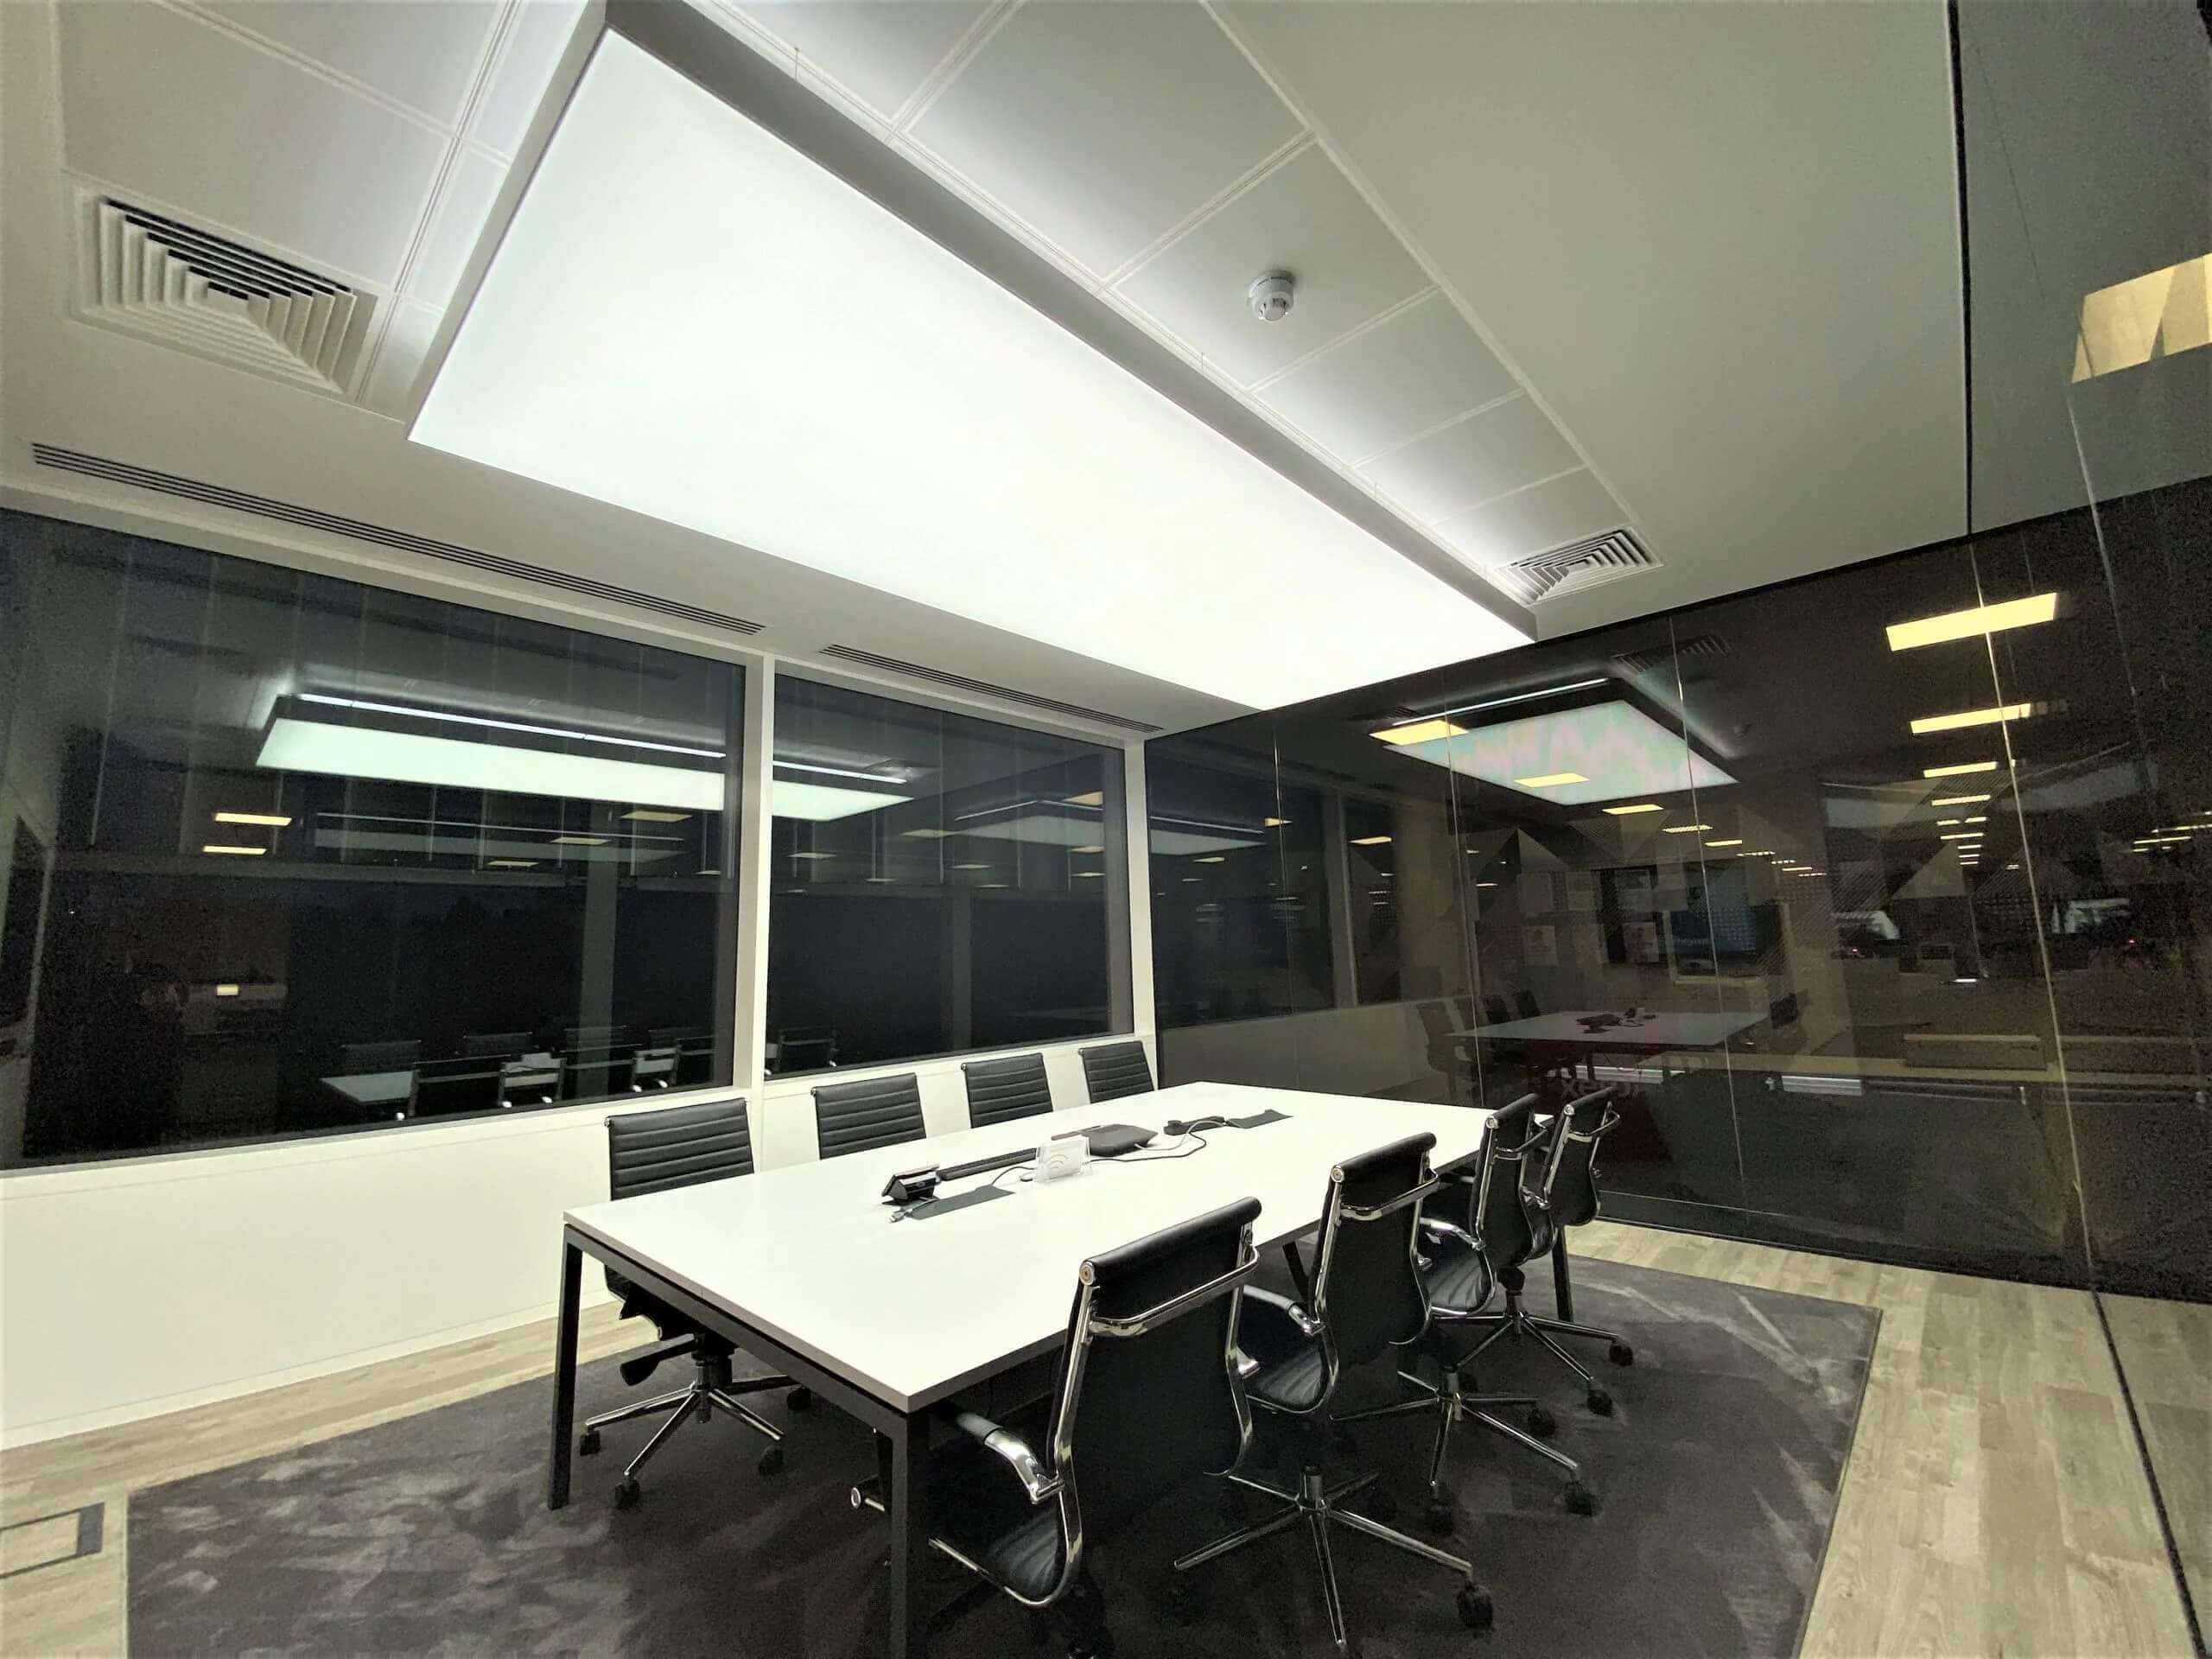 Xerox Bright suspended light in conference room